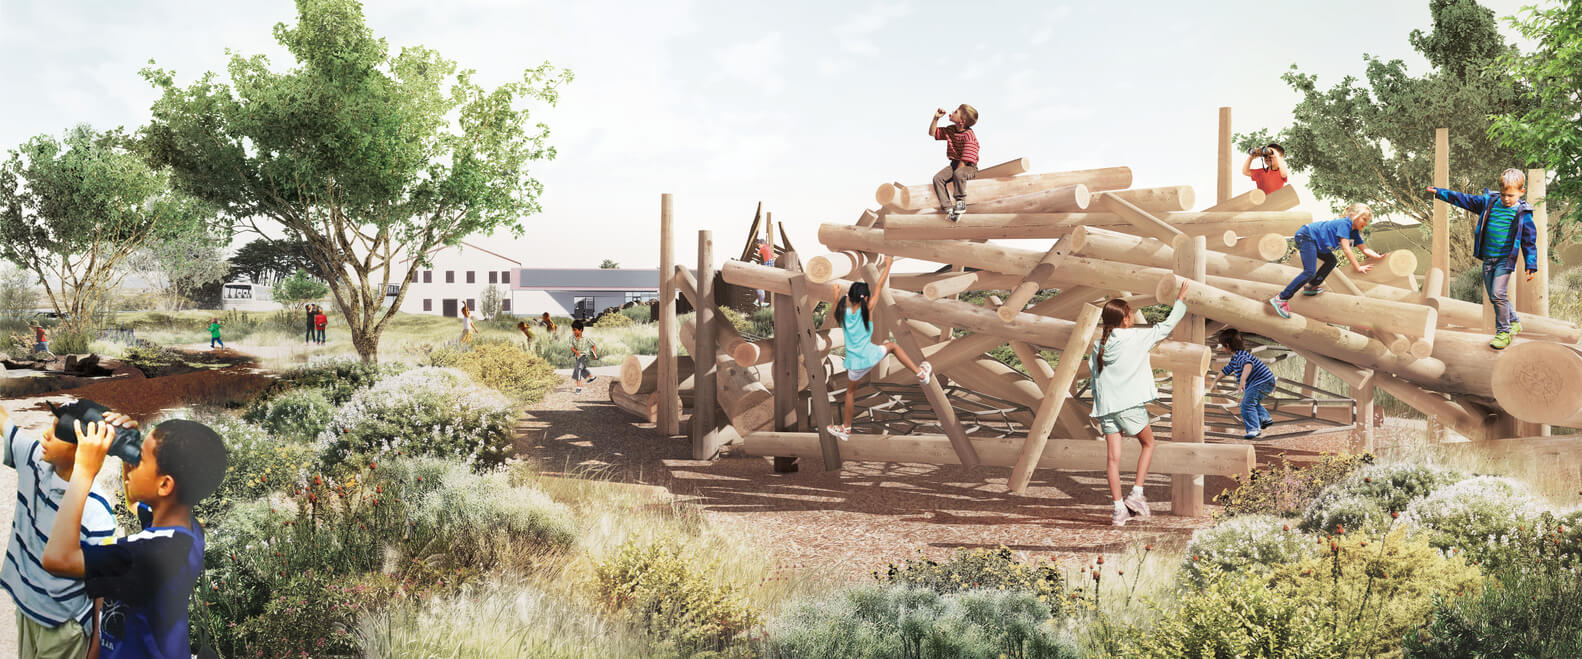 rendering of a kids play area built from natural logs